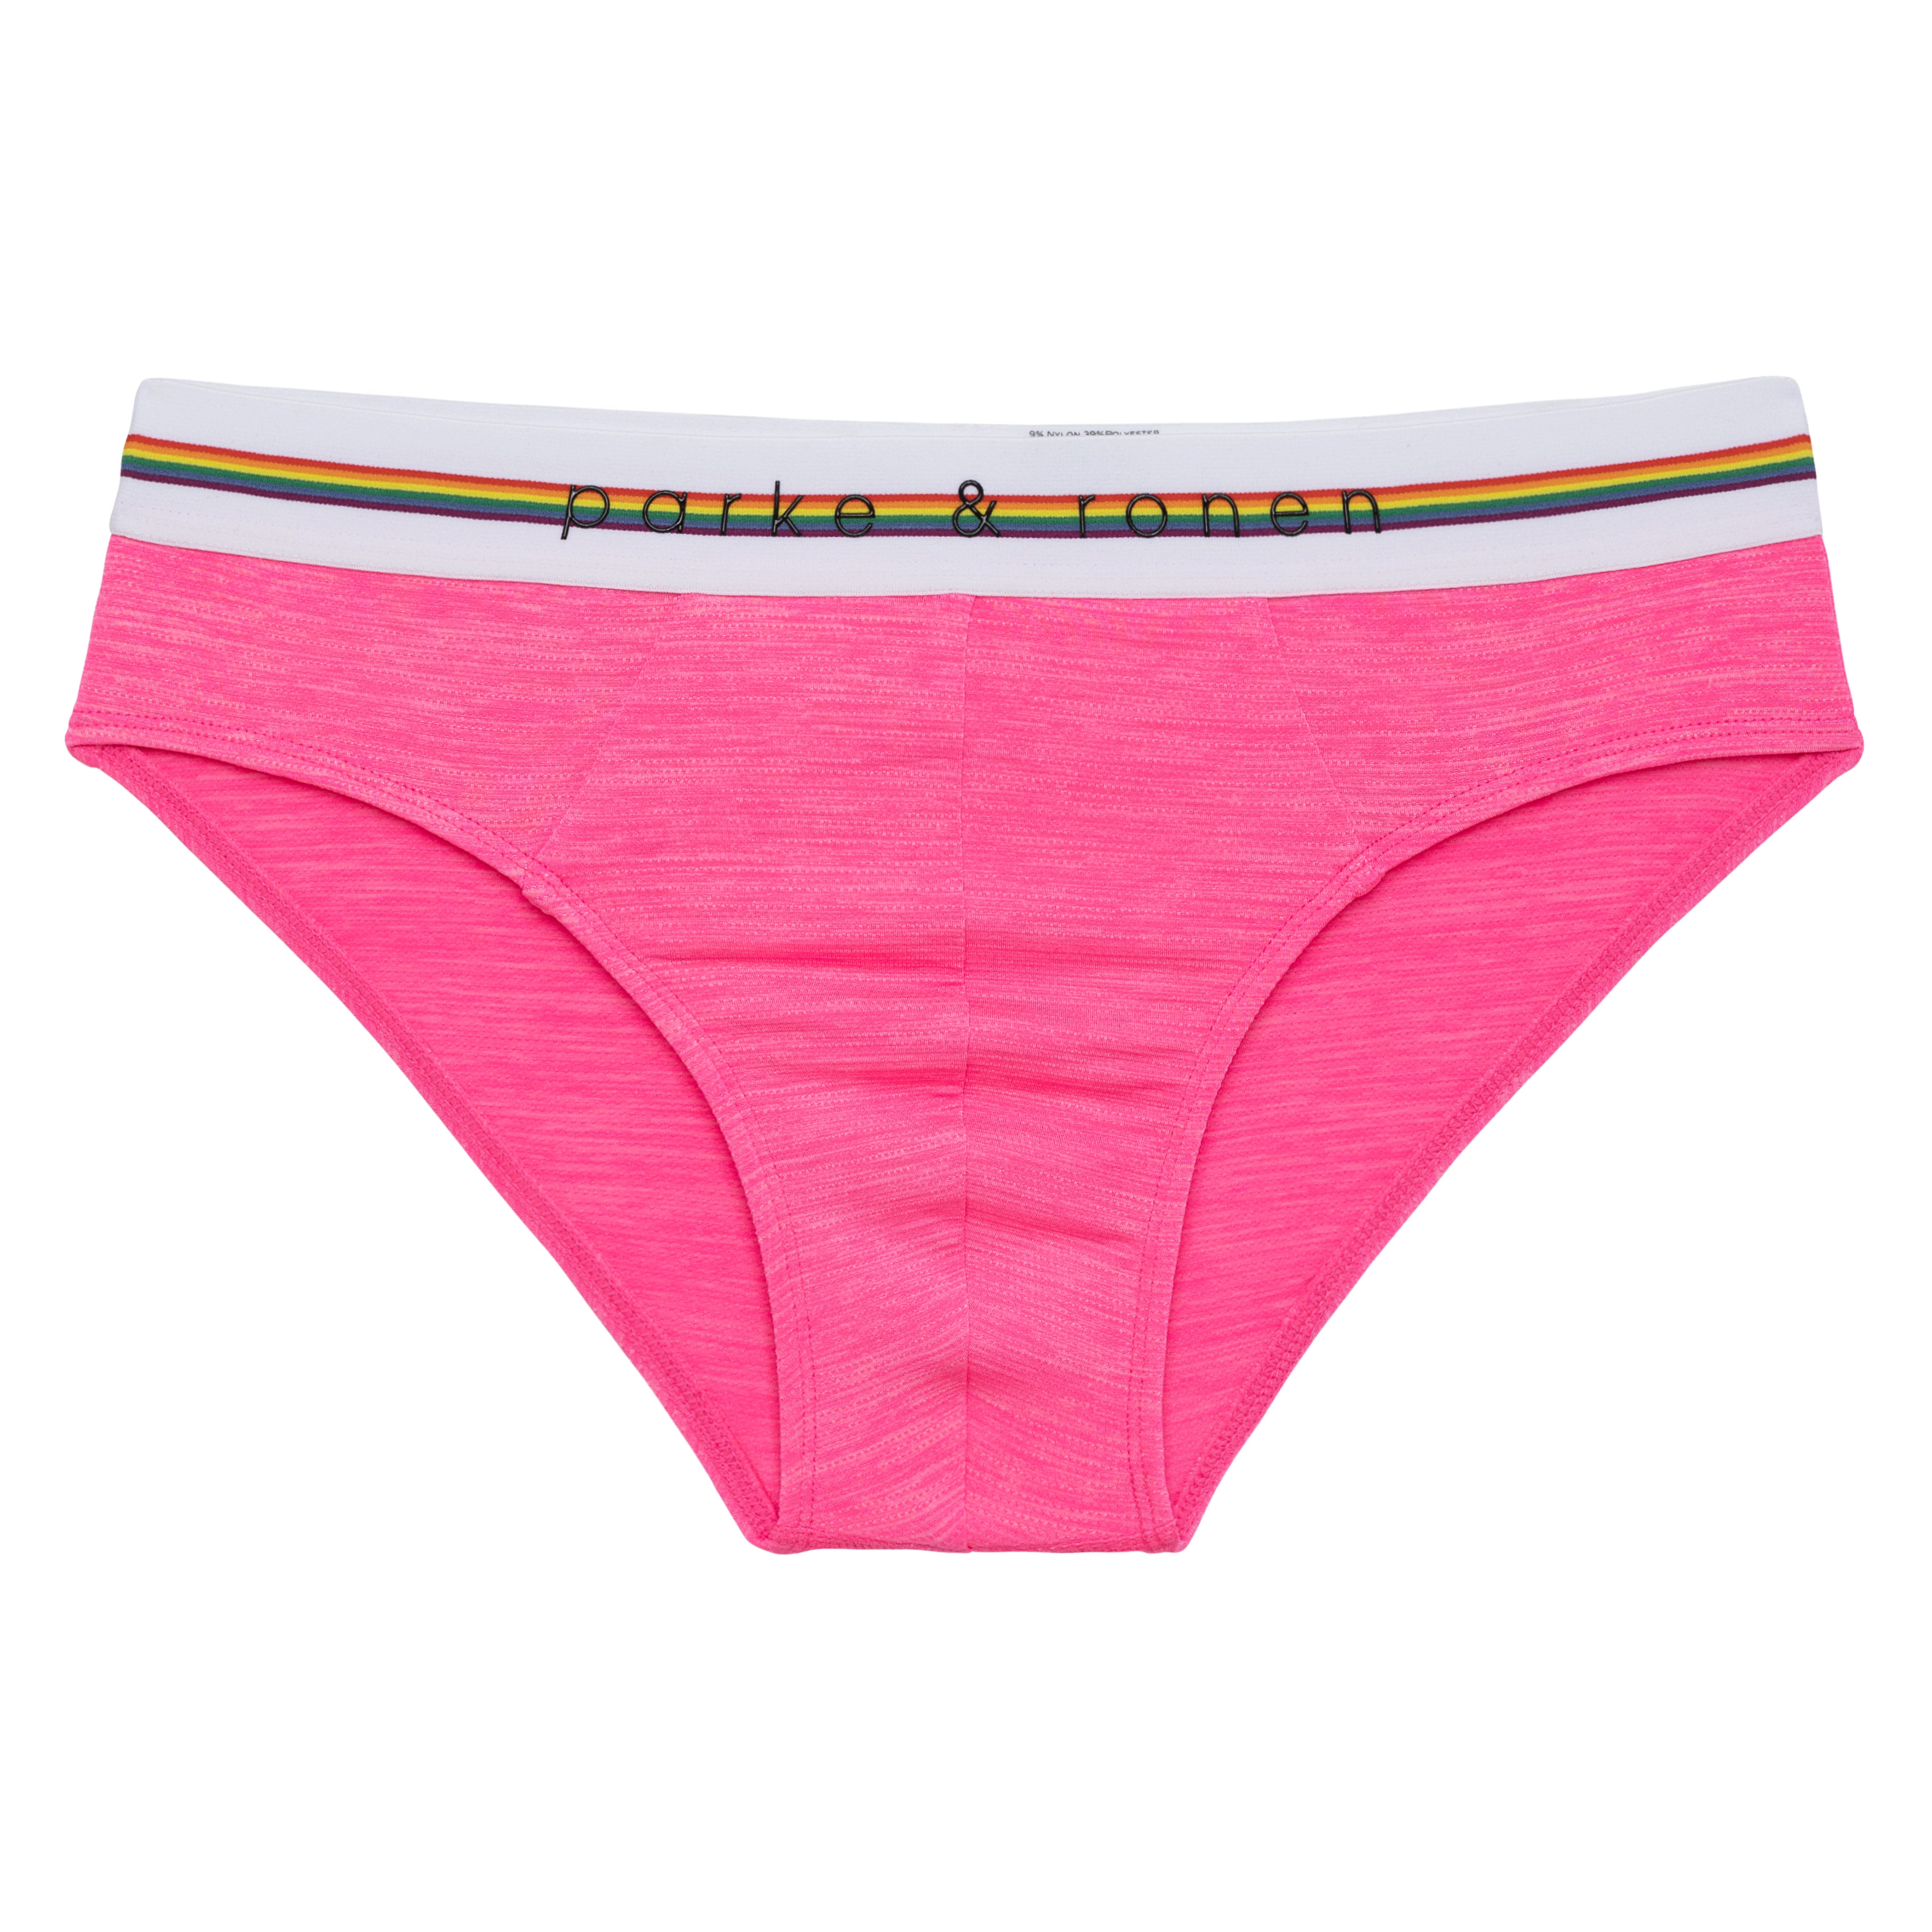 LIMITED PRIDE EDITION- Barbie Pink Heather Mesh Low Rise Brief